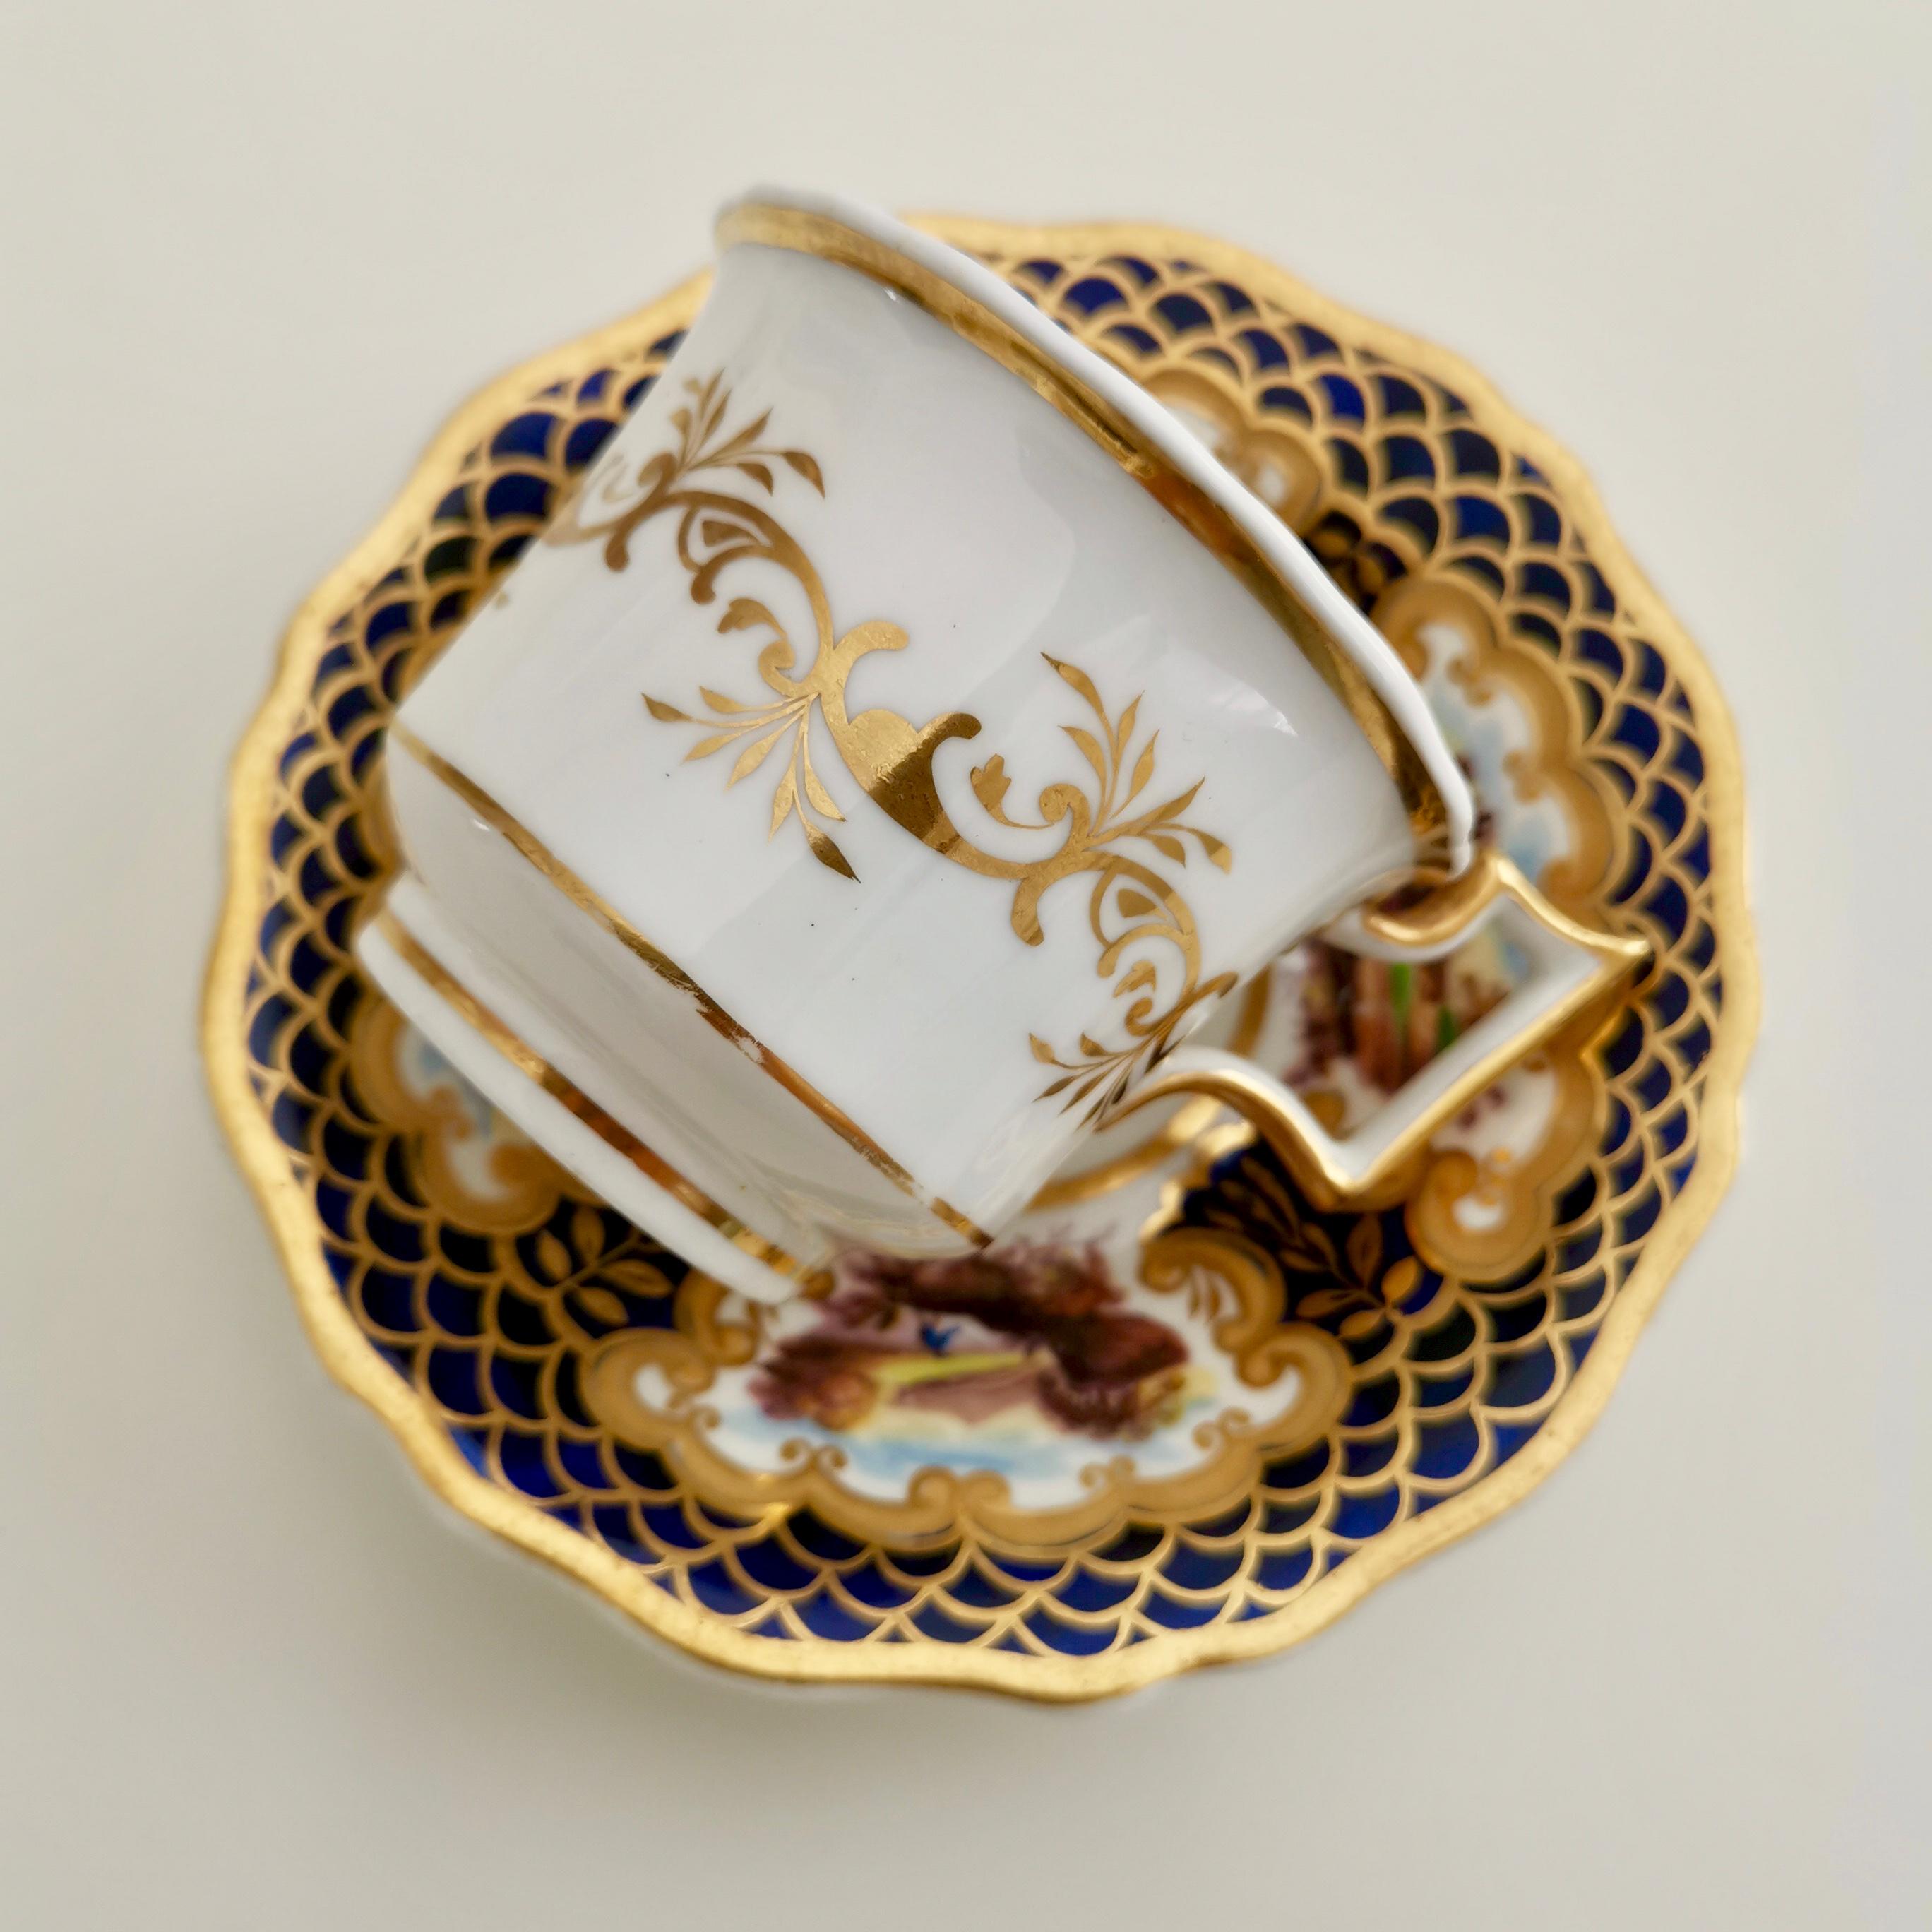 English Rare Ridgway Coffee Cup, Cobalt Blue, Gilt and Sublime Landscapes, circa 1825